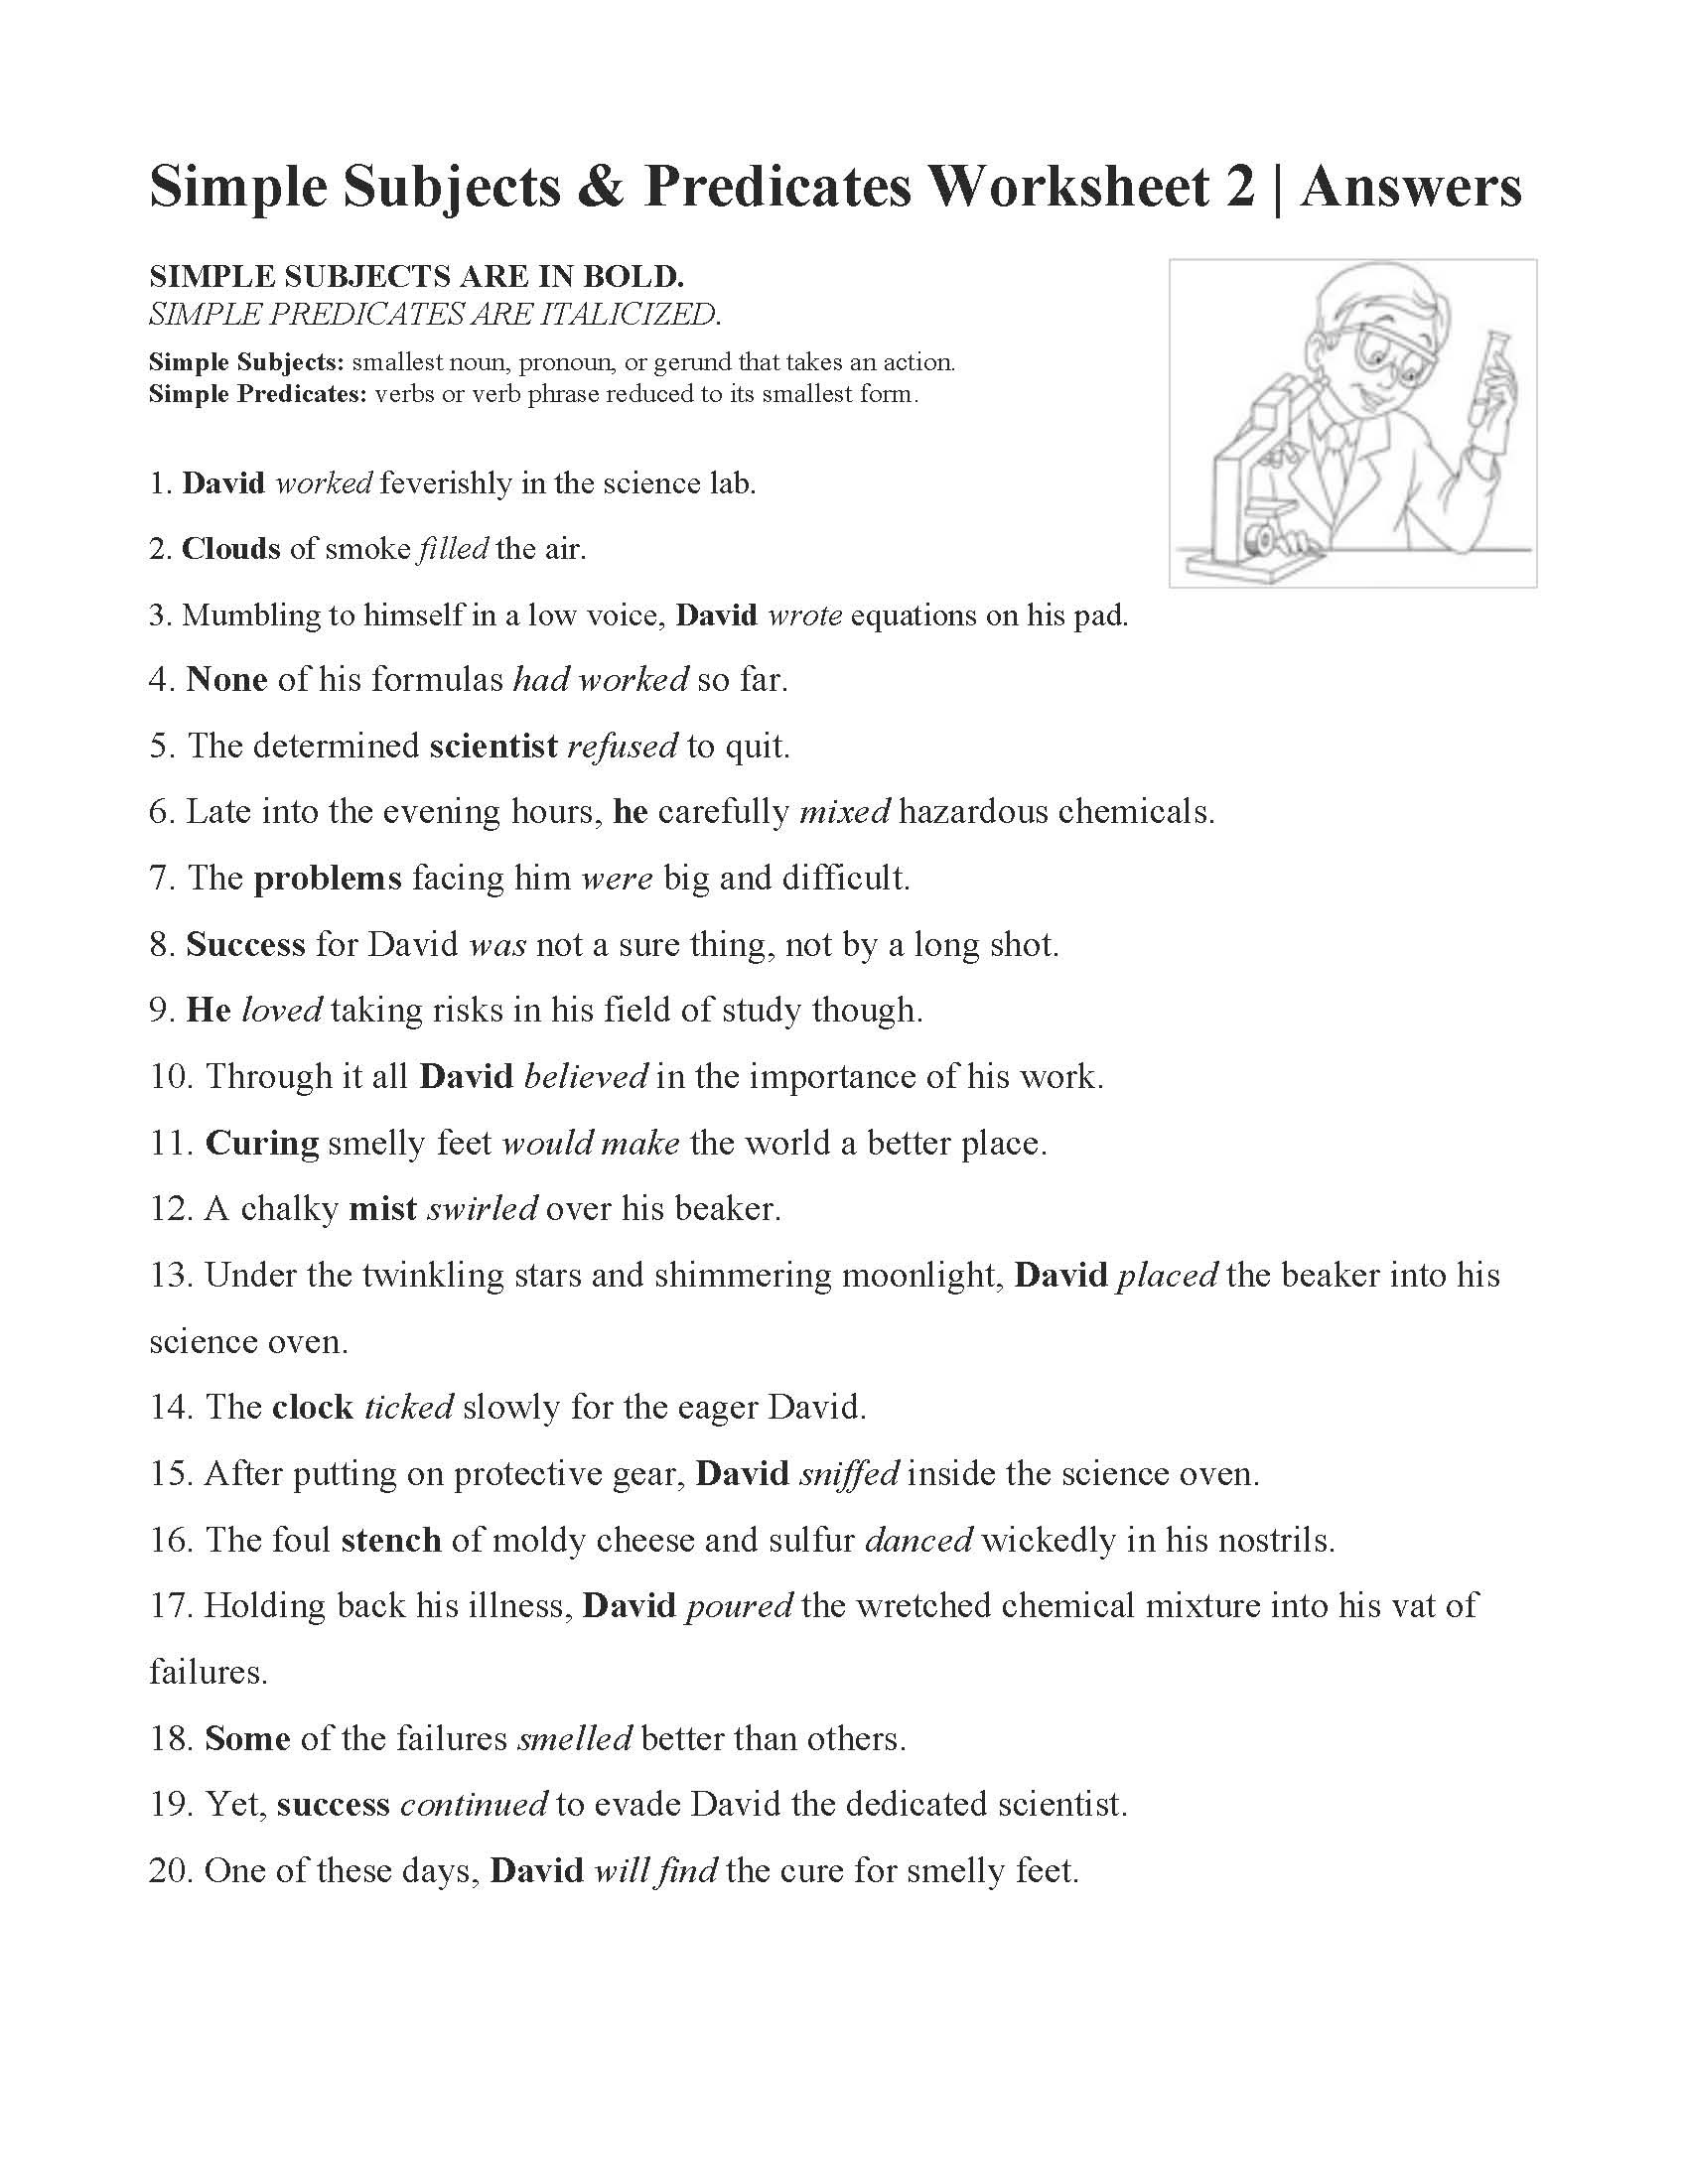 Subject and Predicate Worksheet Simple Subjects and Predicates Worksheet 2